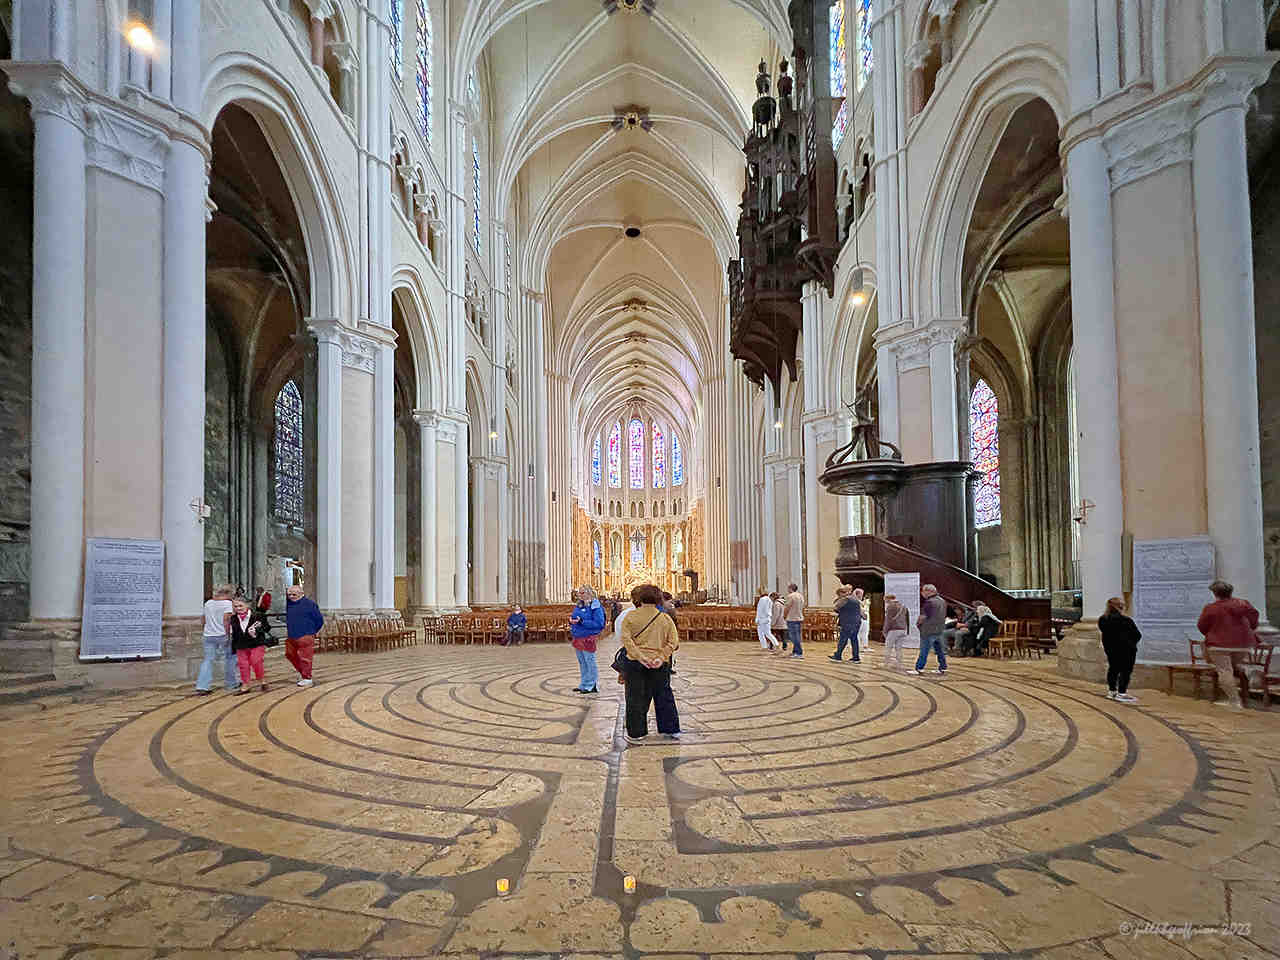 Labyrinth Prayer in the Chartres Cathedral (France)